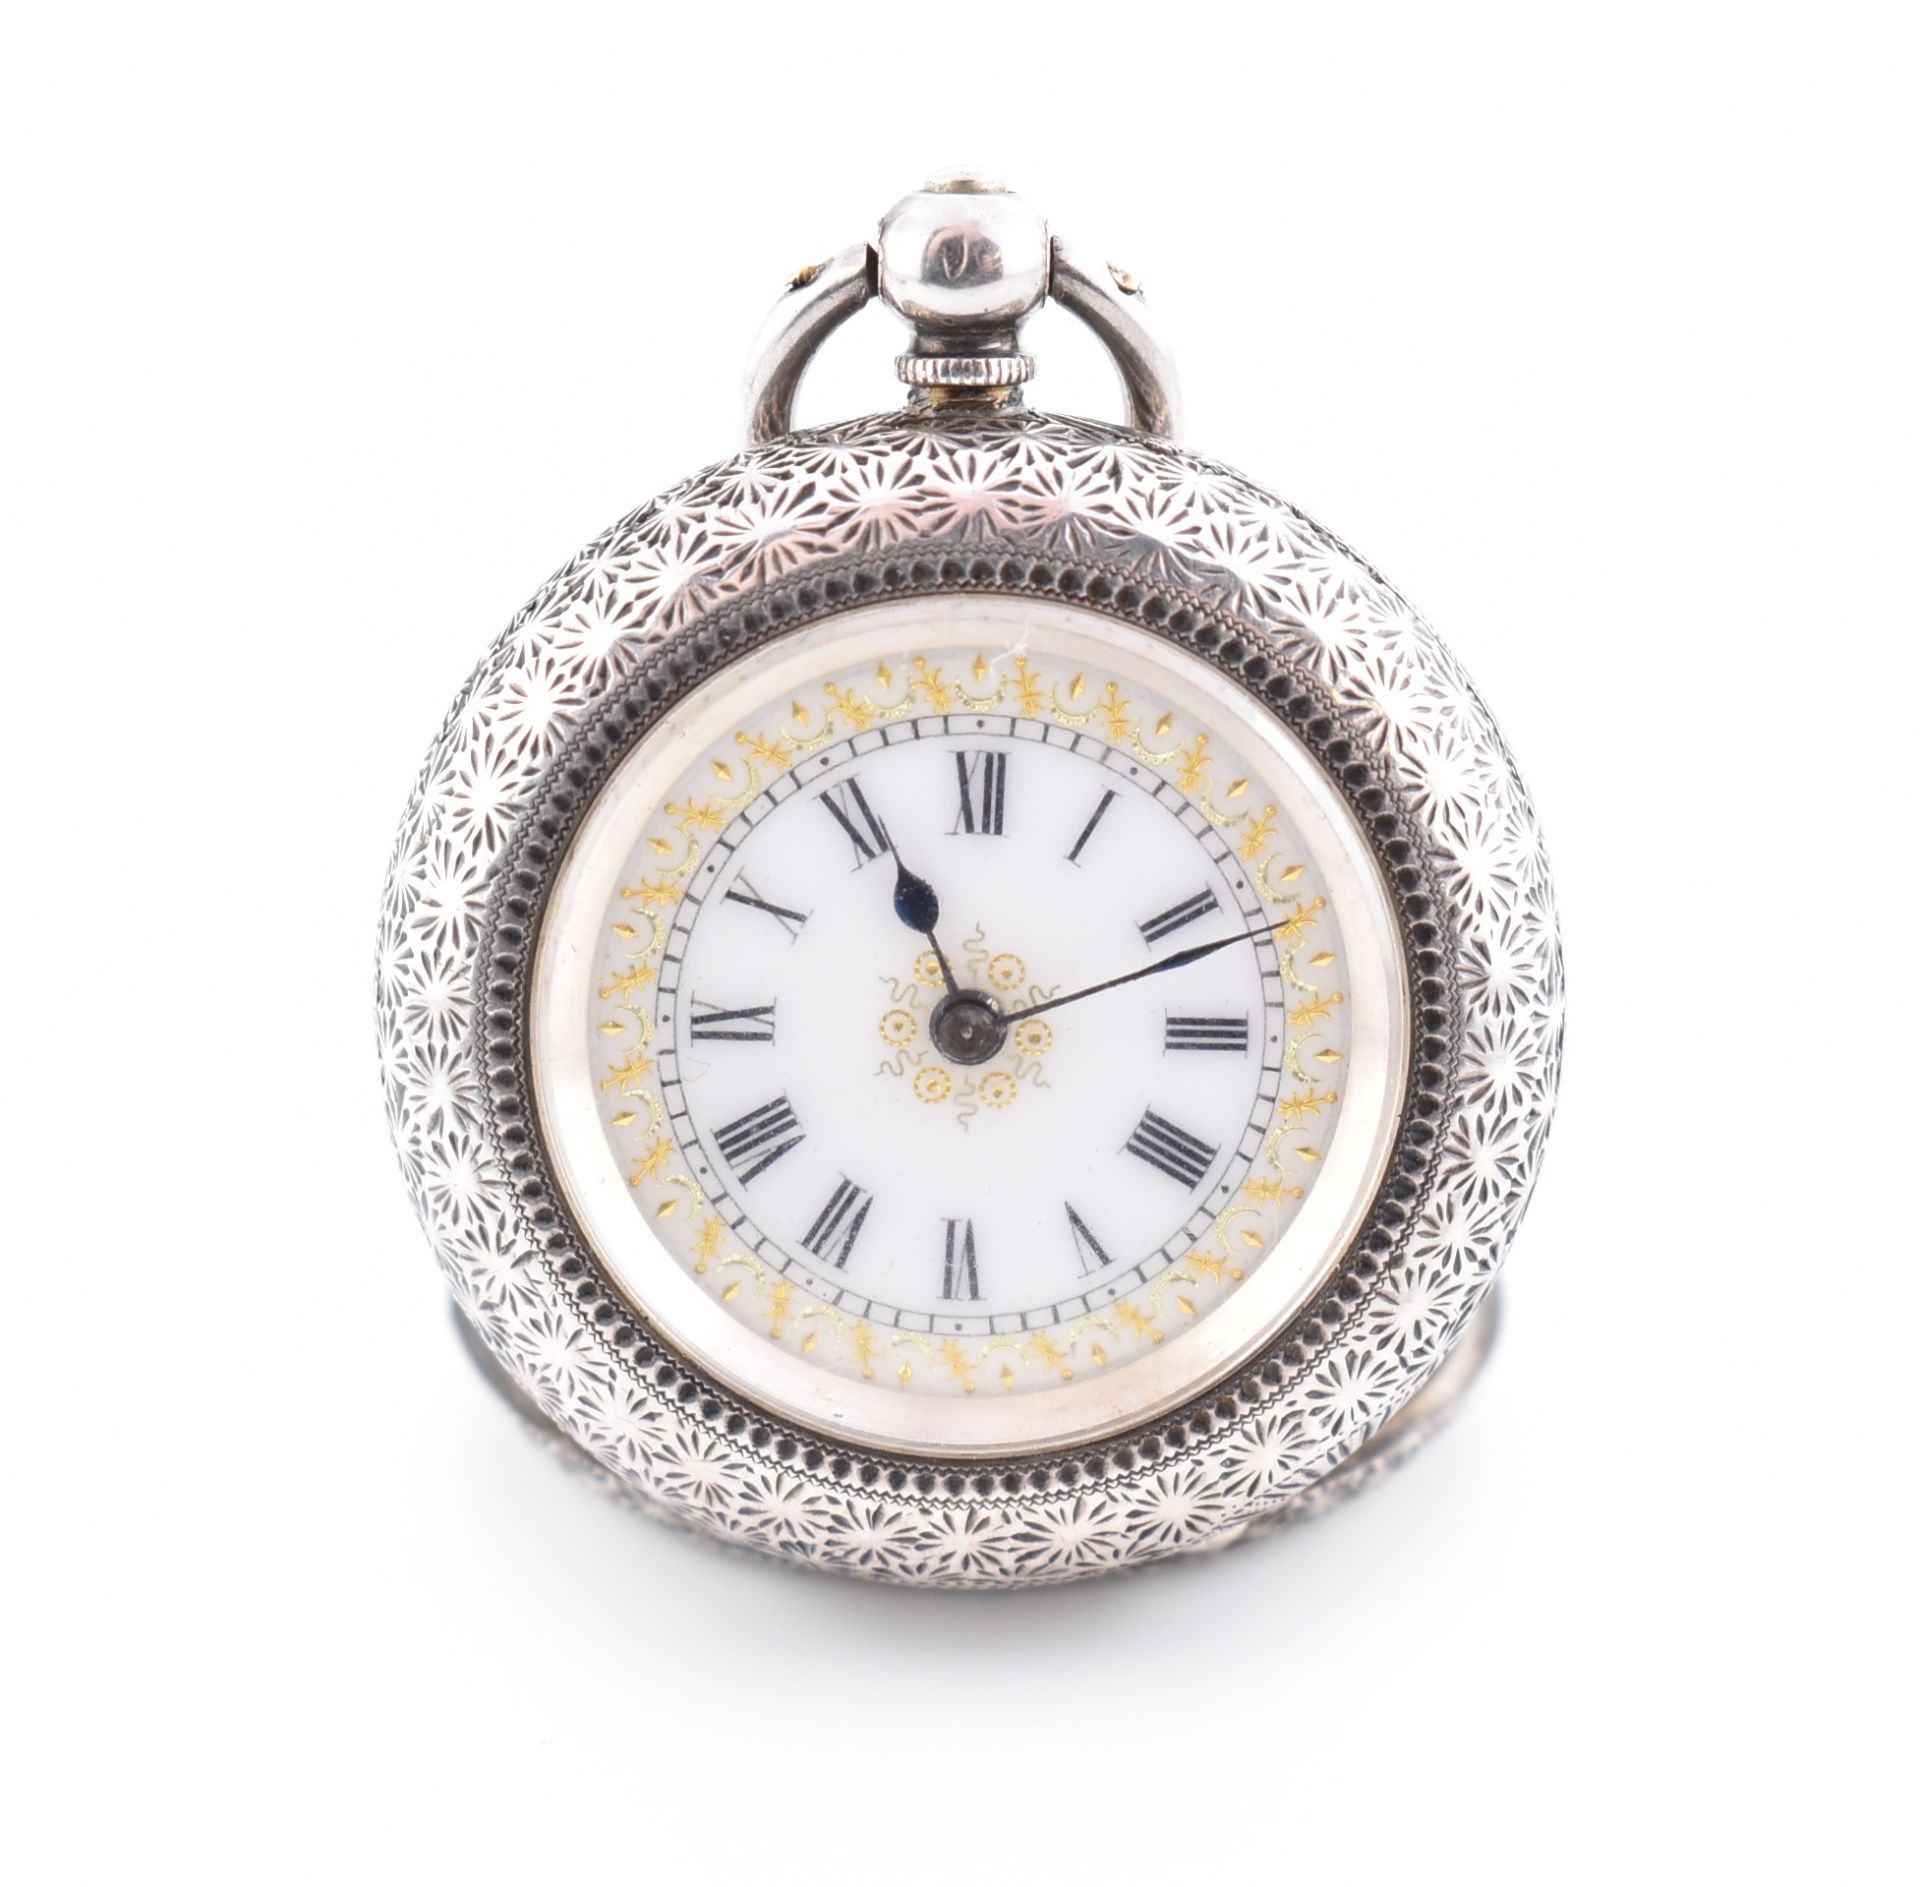 TWO SWISS 935 SILVER POCKET WATCHES 1888 - 1914 - Image 8 of 9